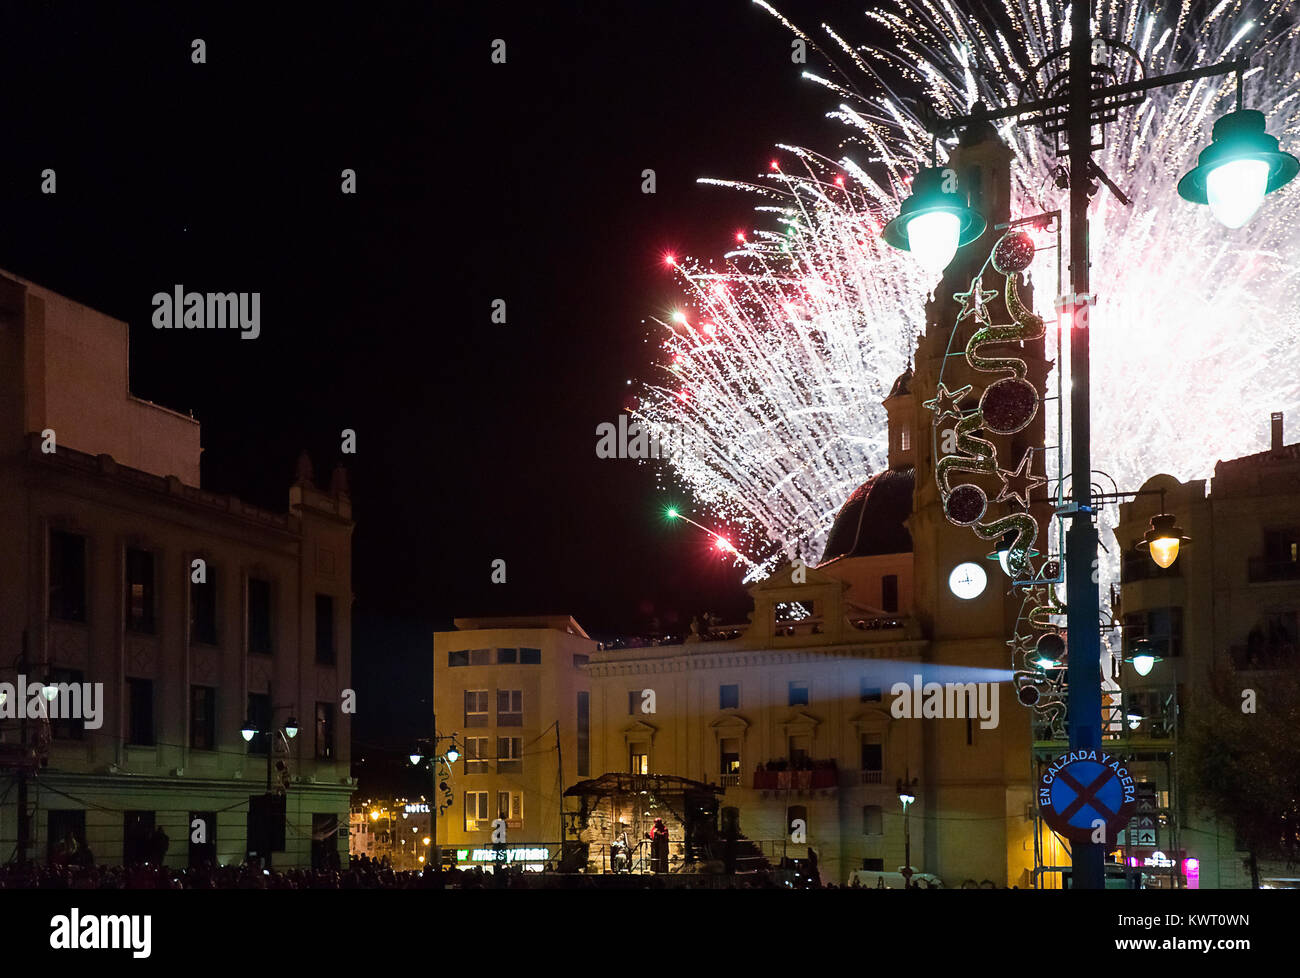 Alcoy, Spain. January 5, 2018: Fireworks in the Plaza de España for the arrival of the Magi to the Portal de Belen. The arrival of the Magi to the city of Alcoy, is the most anticipated date for children throughout the year. A Festival of National Tourist Interest that brings together hundreds of visitors every year who want to live the message and emotion of this centuries-old Cavalcade. Stock Photo